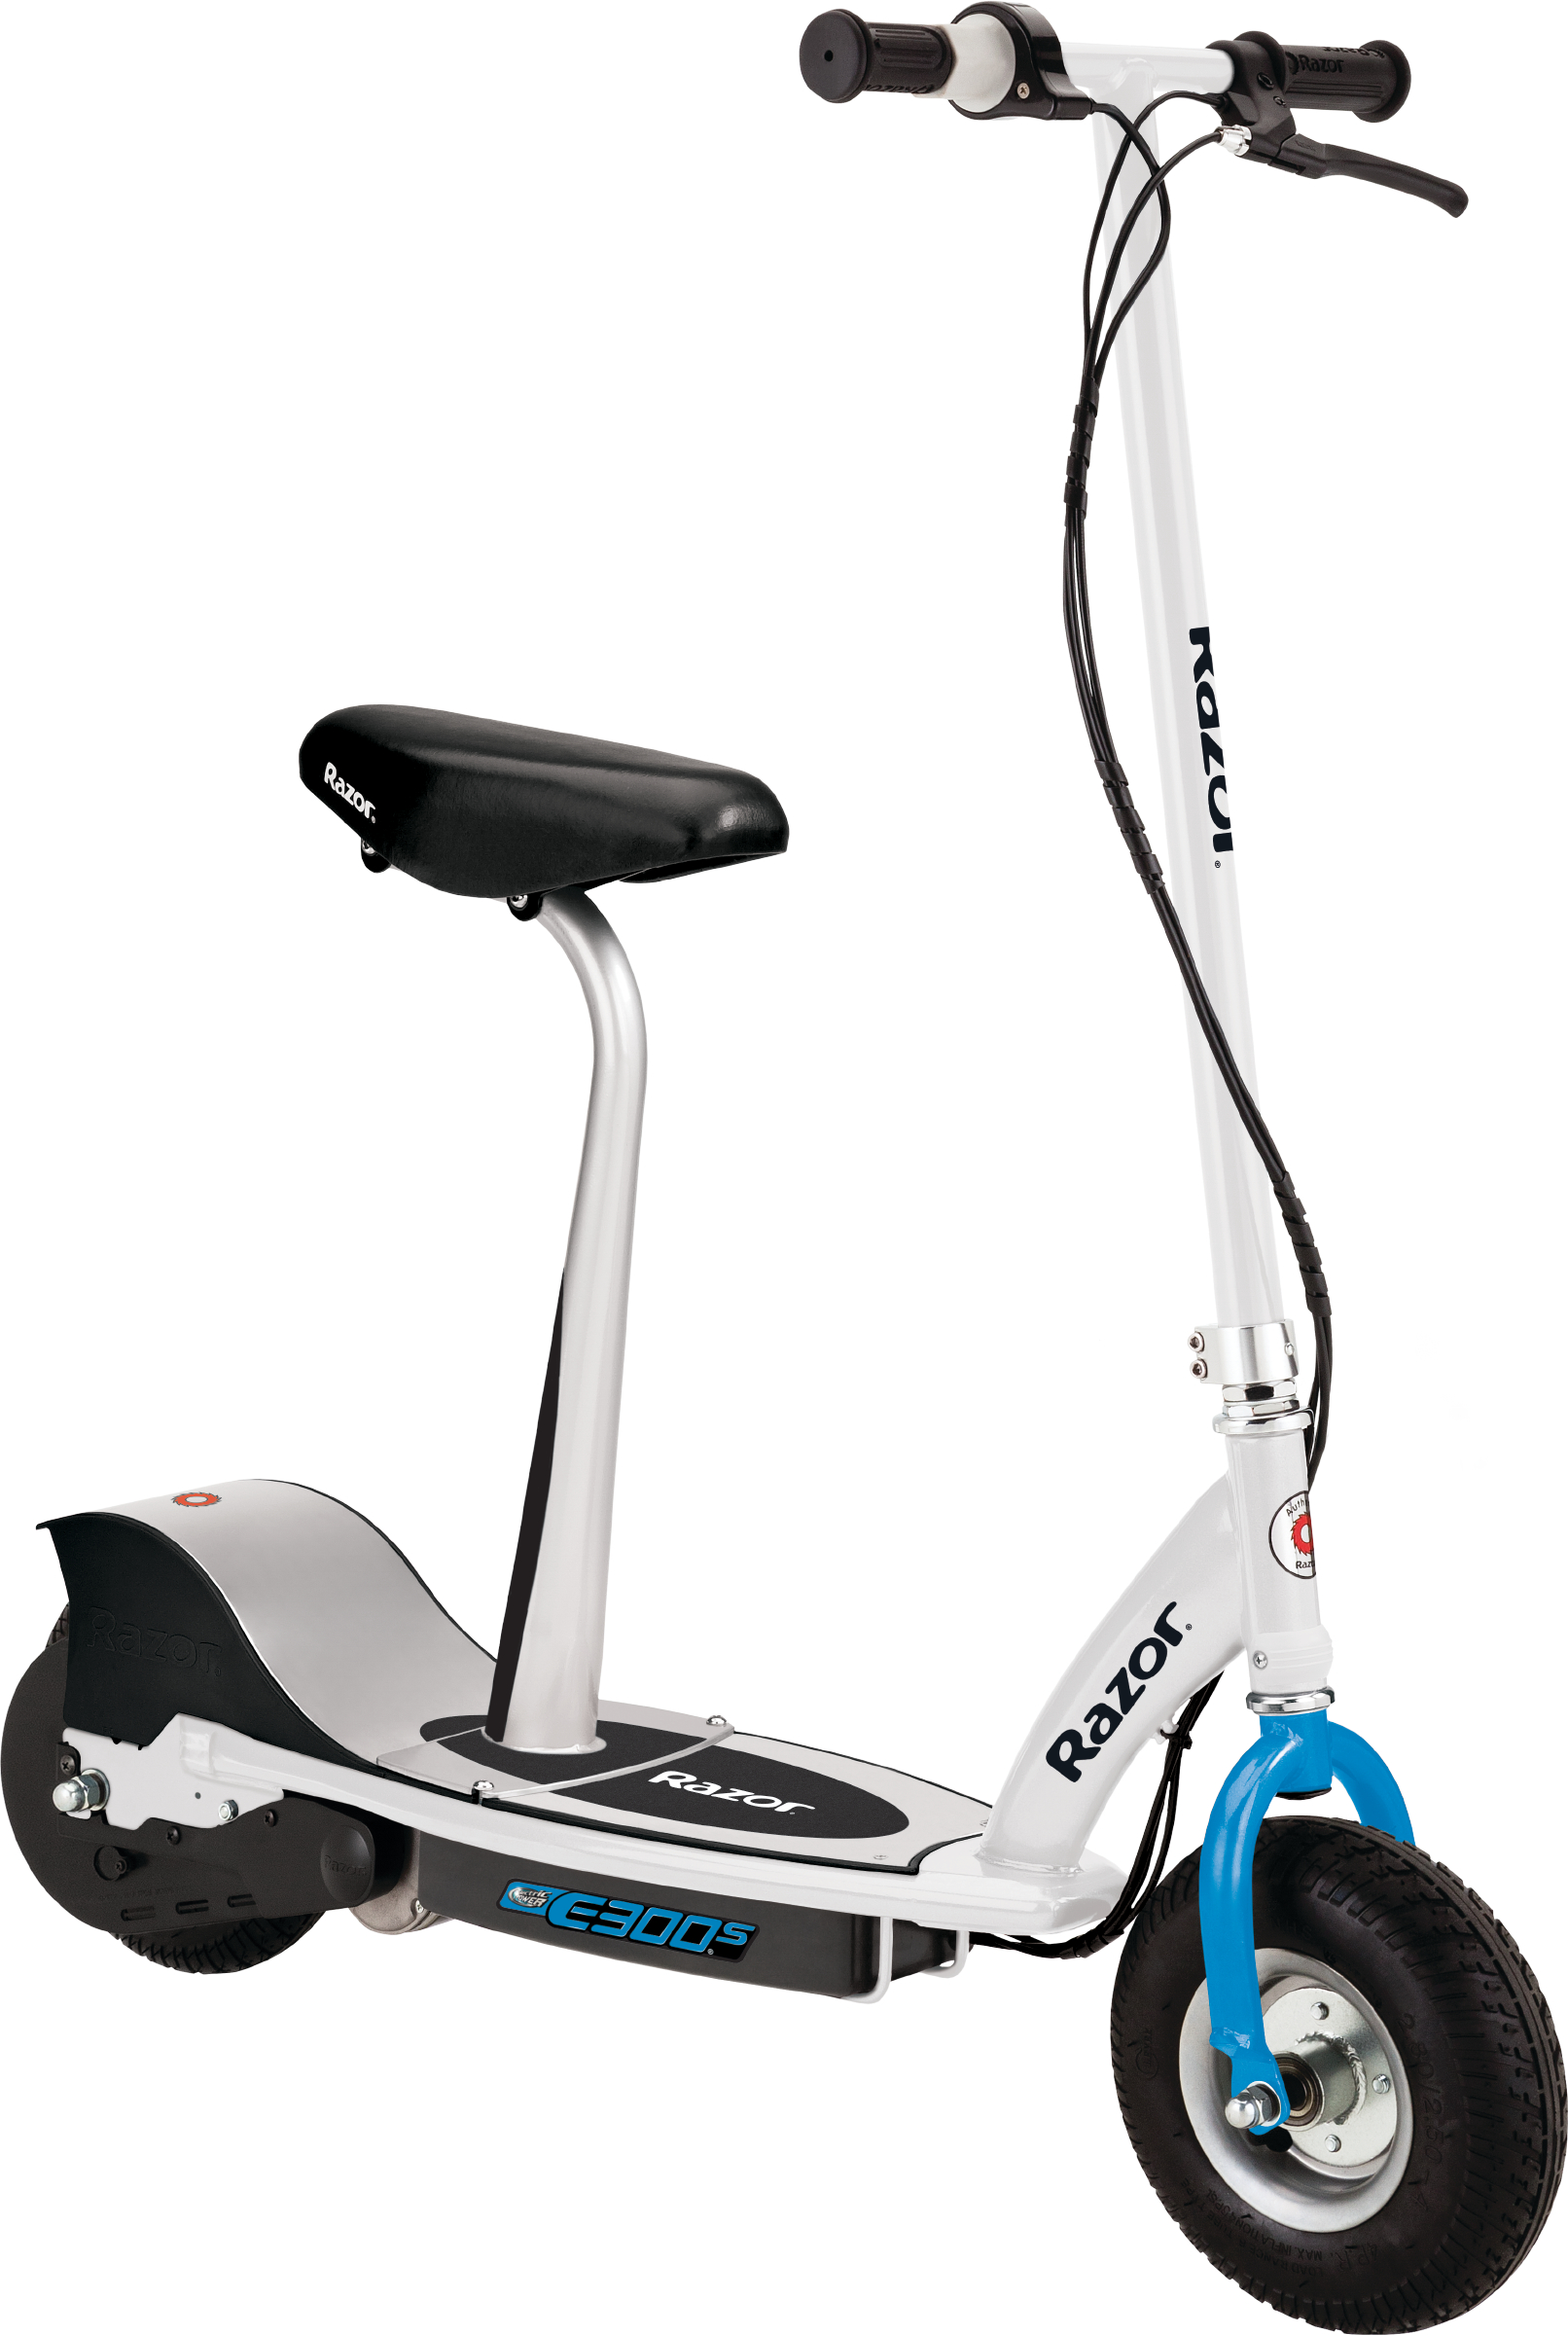 Razor E300S Seated Electric Scooter - White, for Ages 13+ and up to 220 lbs, 9" Pneumatic Front Tire, Up to 15 mph & up to 10-mile Range, 250W Chain Motor, 24V Sealed Lead-Acid Battery - image 1 of 12